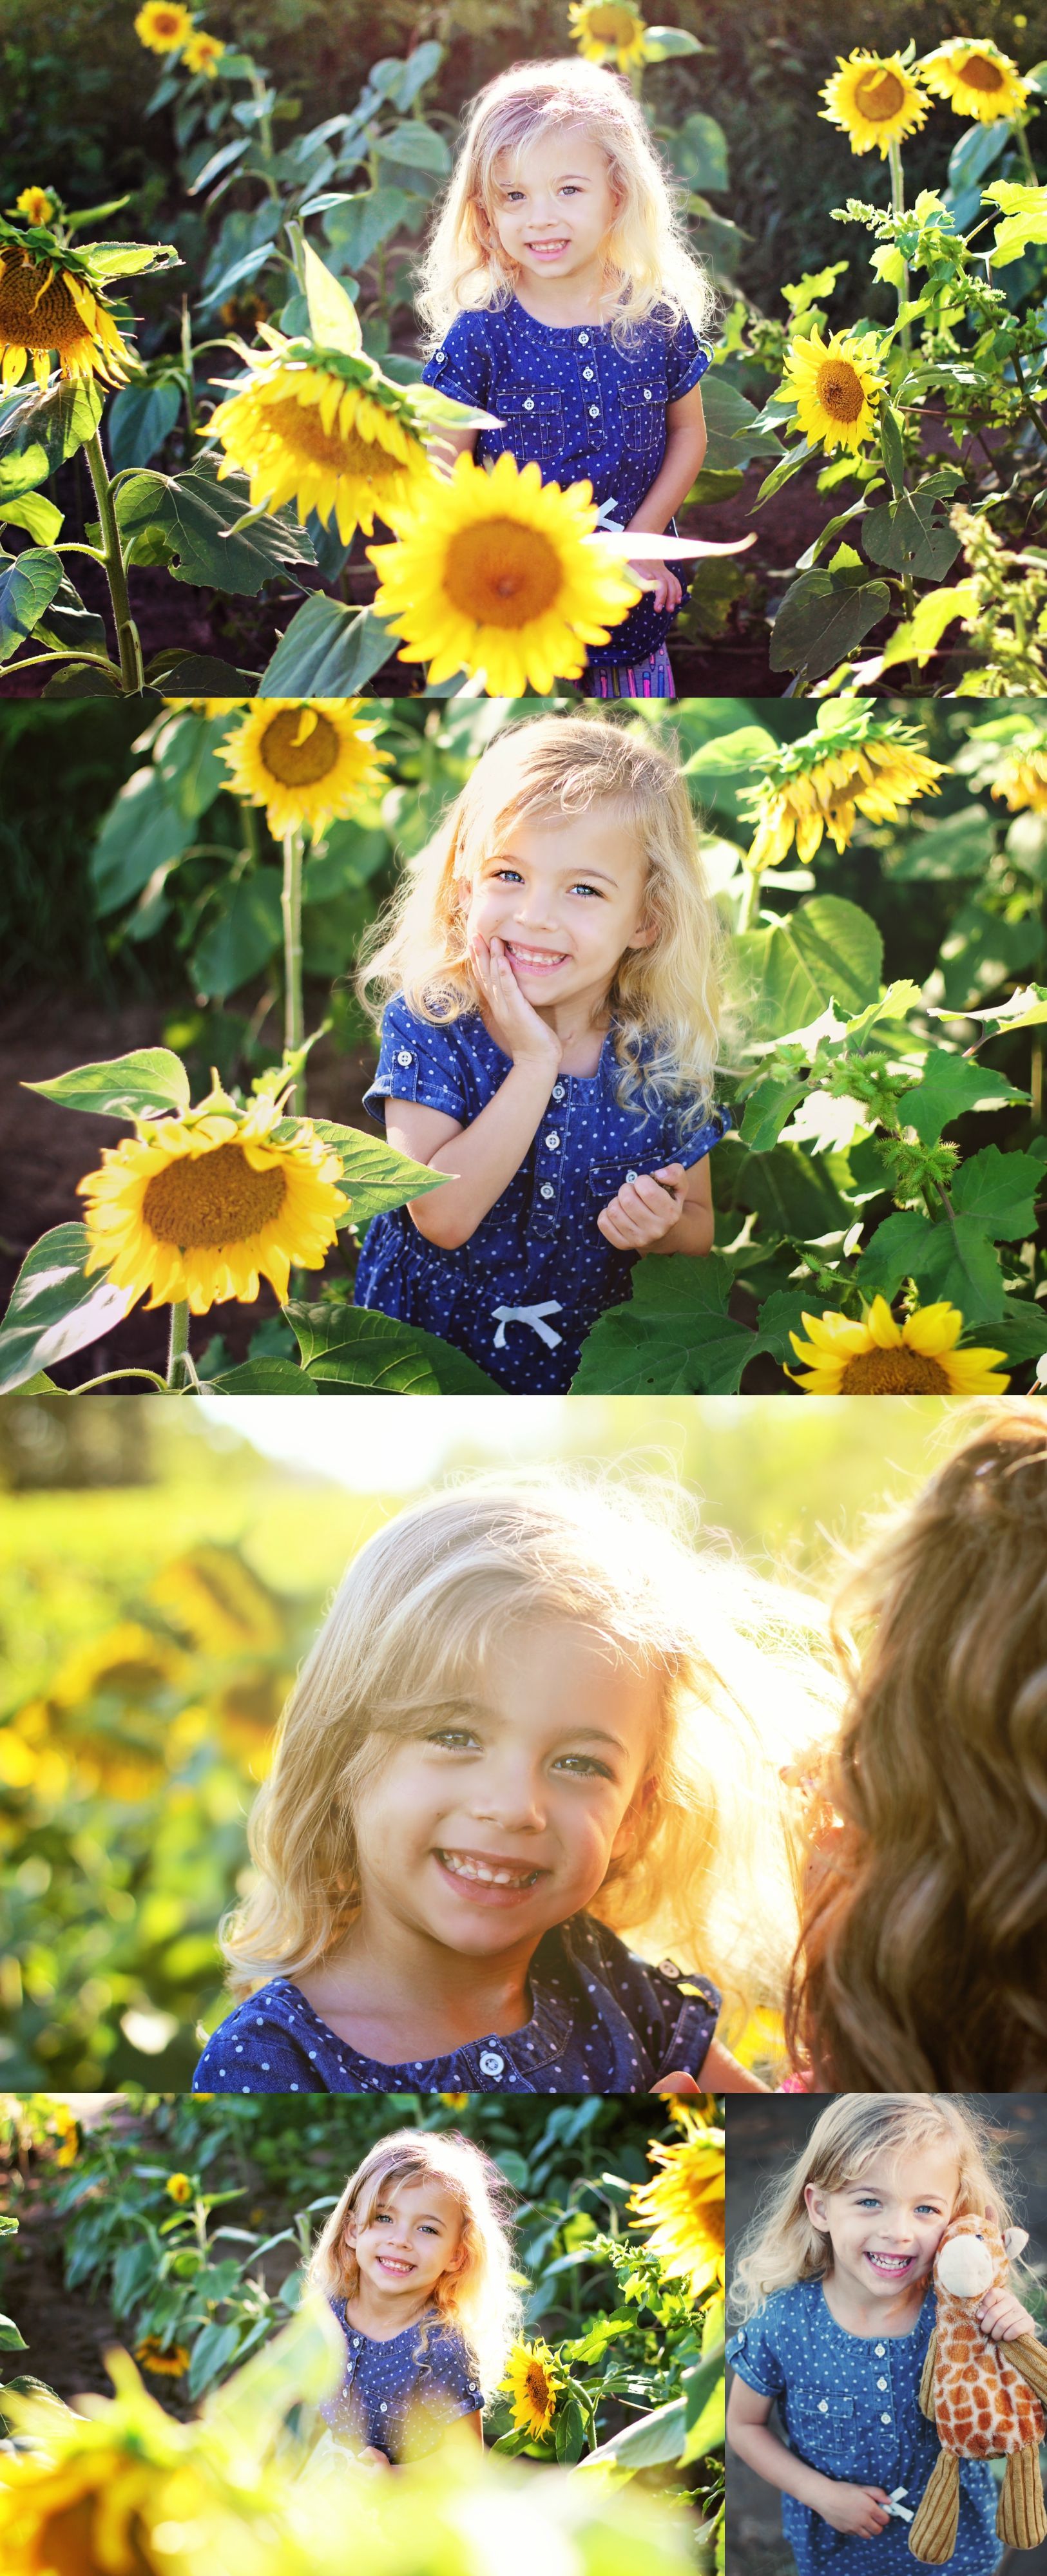 Sunflower Field Photography. Mother and daughter photo shoot